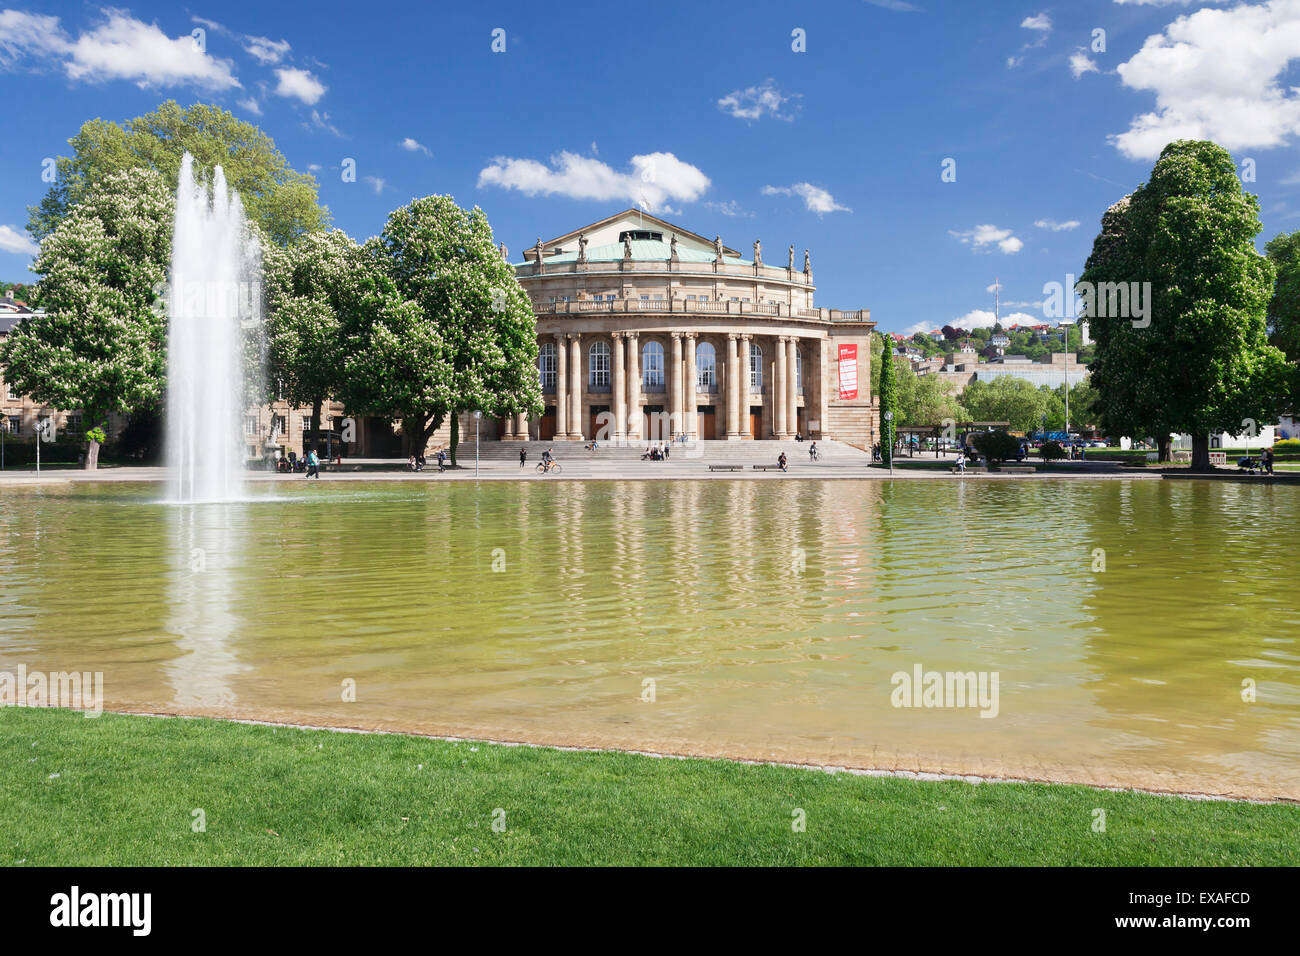 Opera House, Lac Eckensee, le Schlosspark, Stuttgart, Germany, Europe Banque D'Images